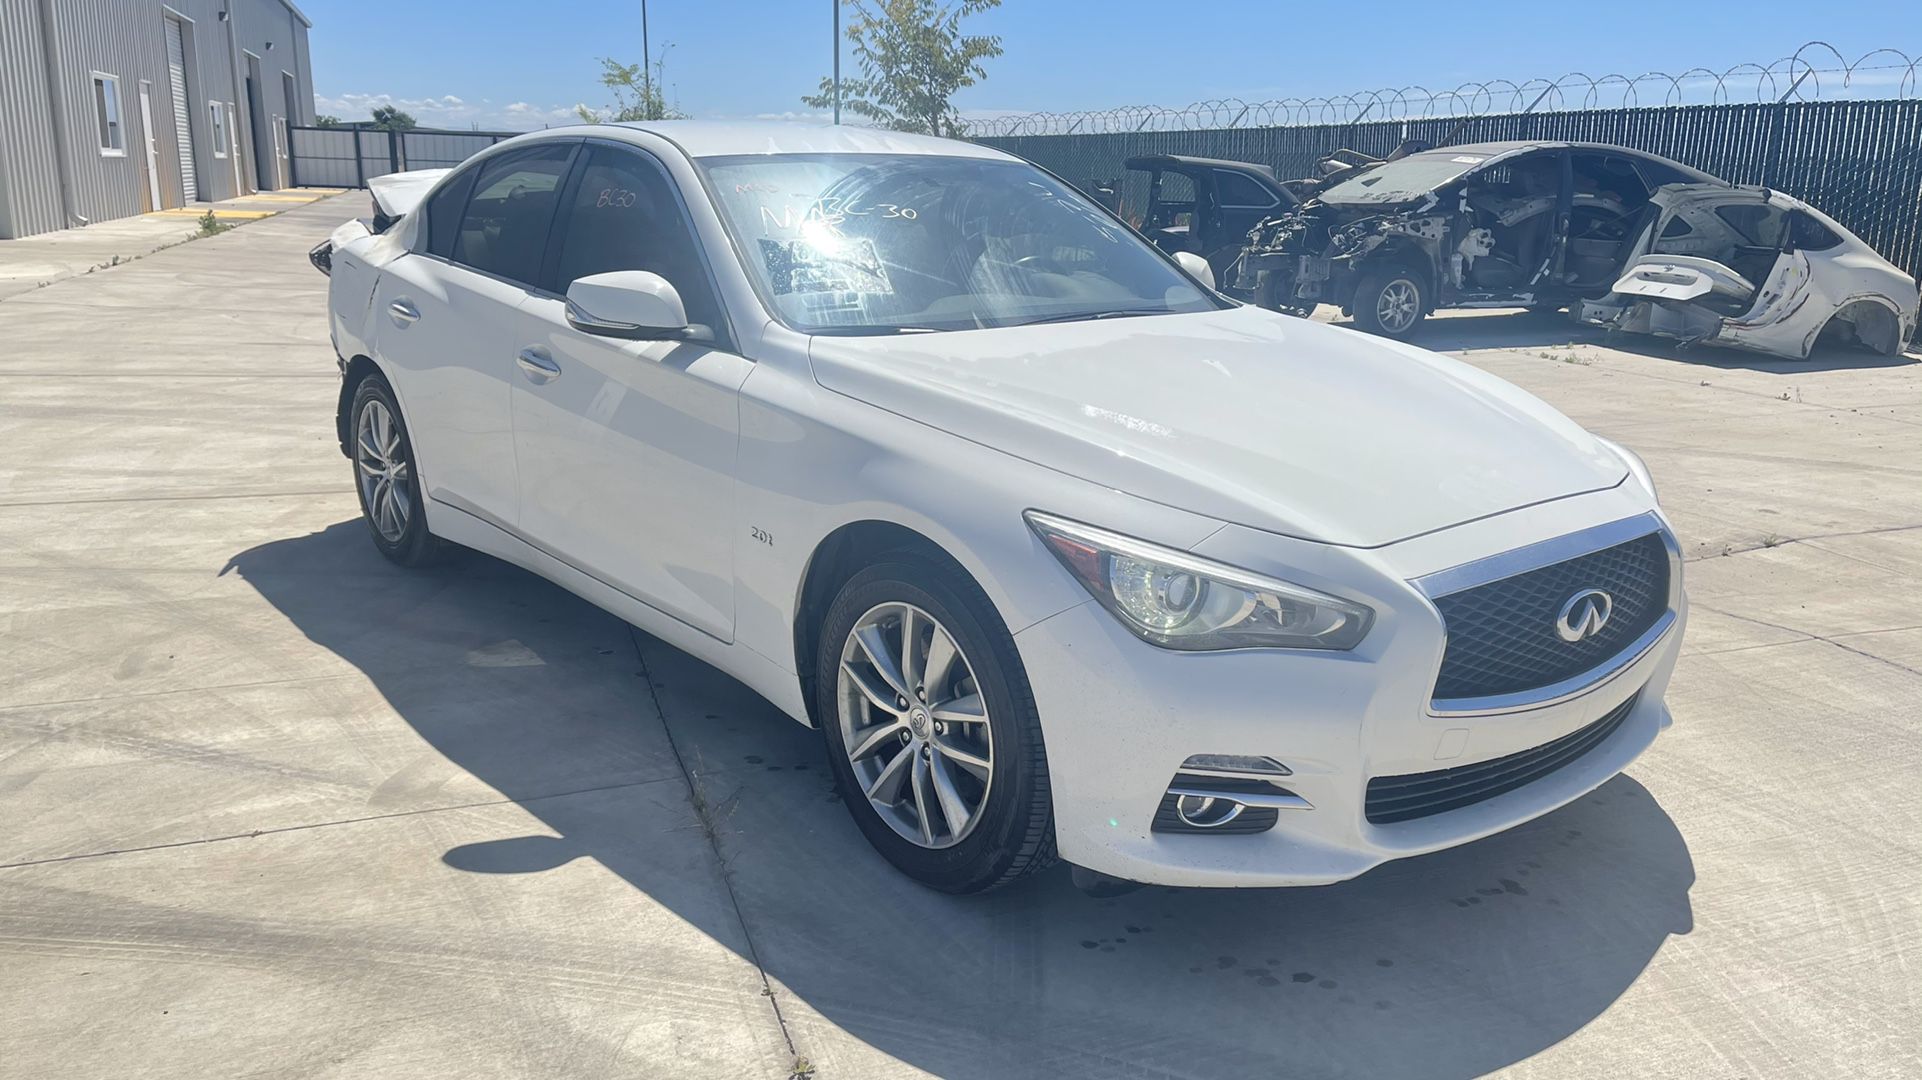 PARTING OUT - 14-20 Infiniti Q50 Parts